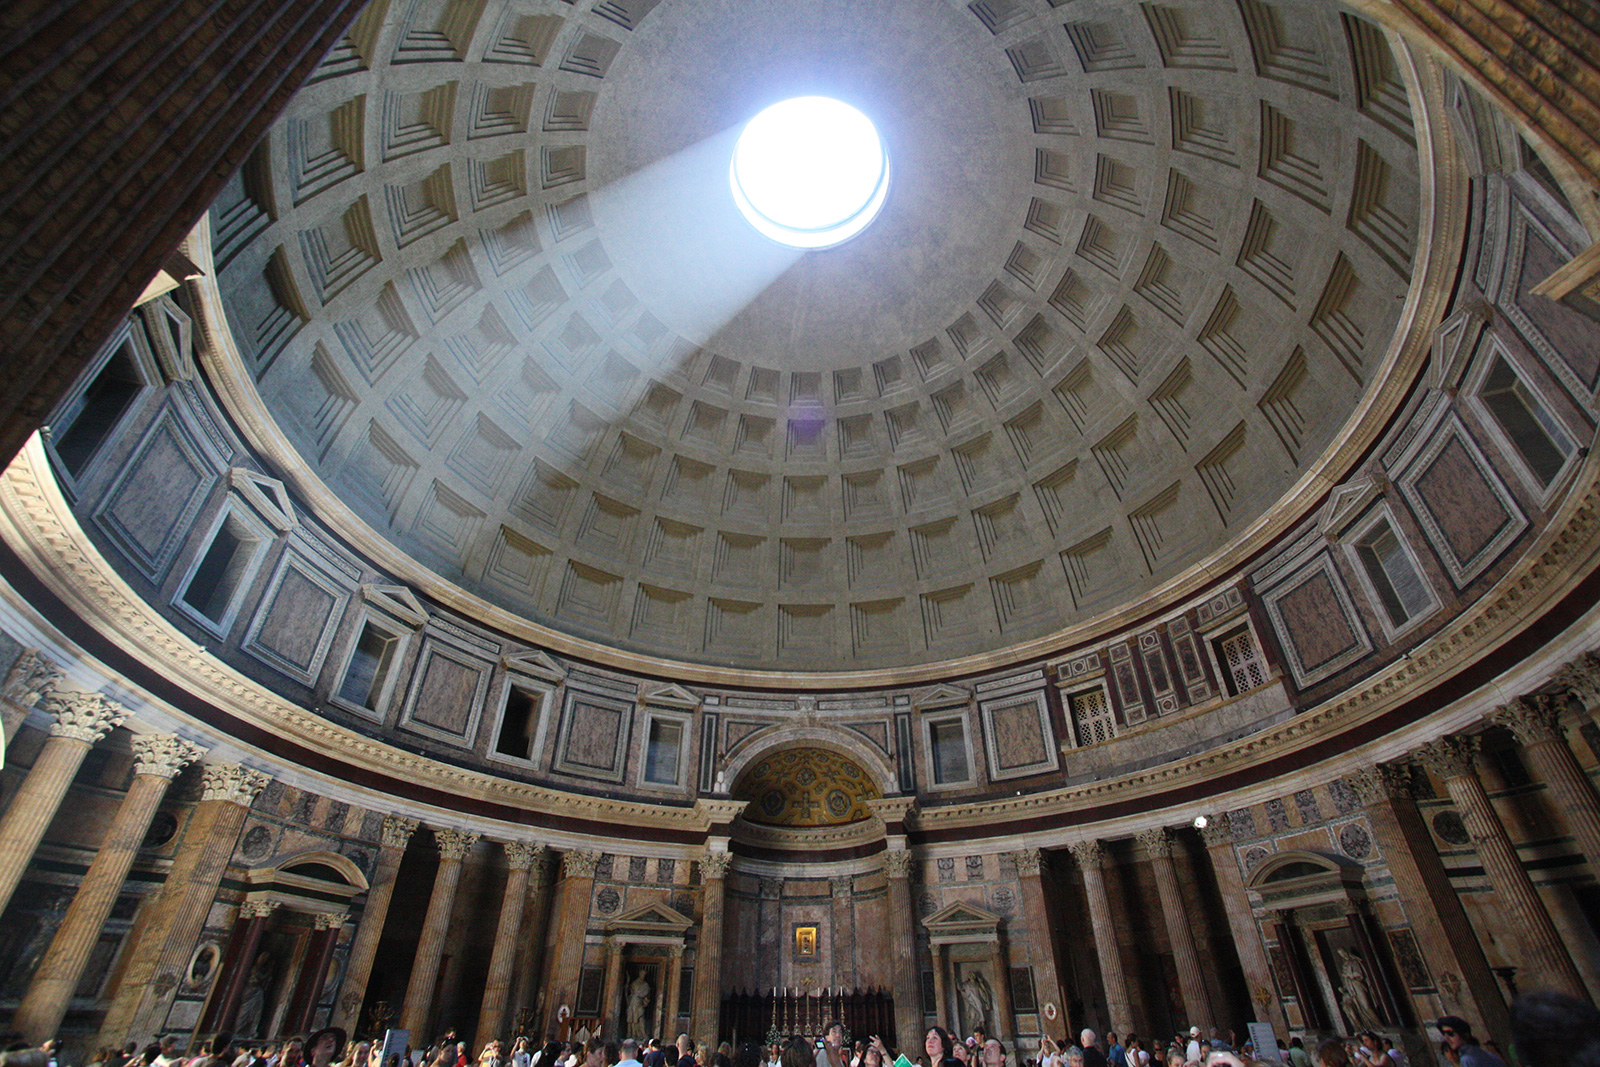 Rome buildings: the oculus of the Pantheon